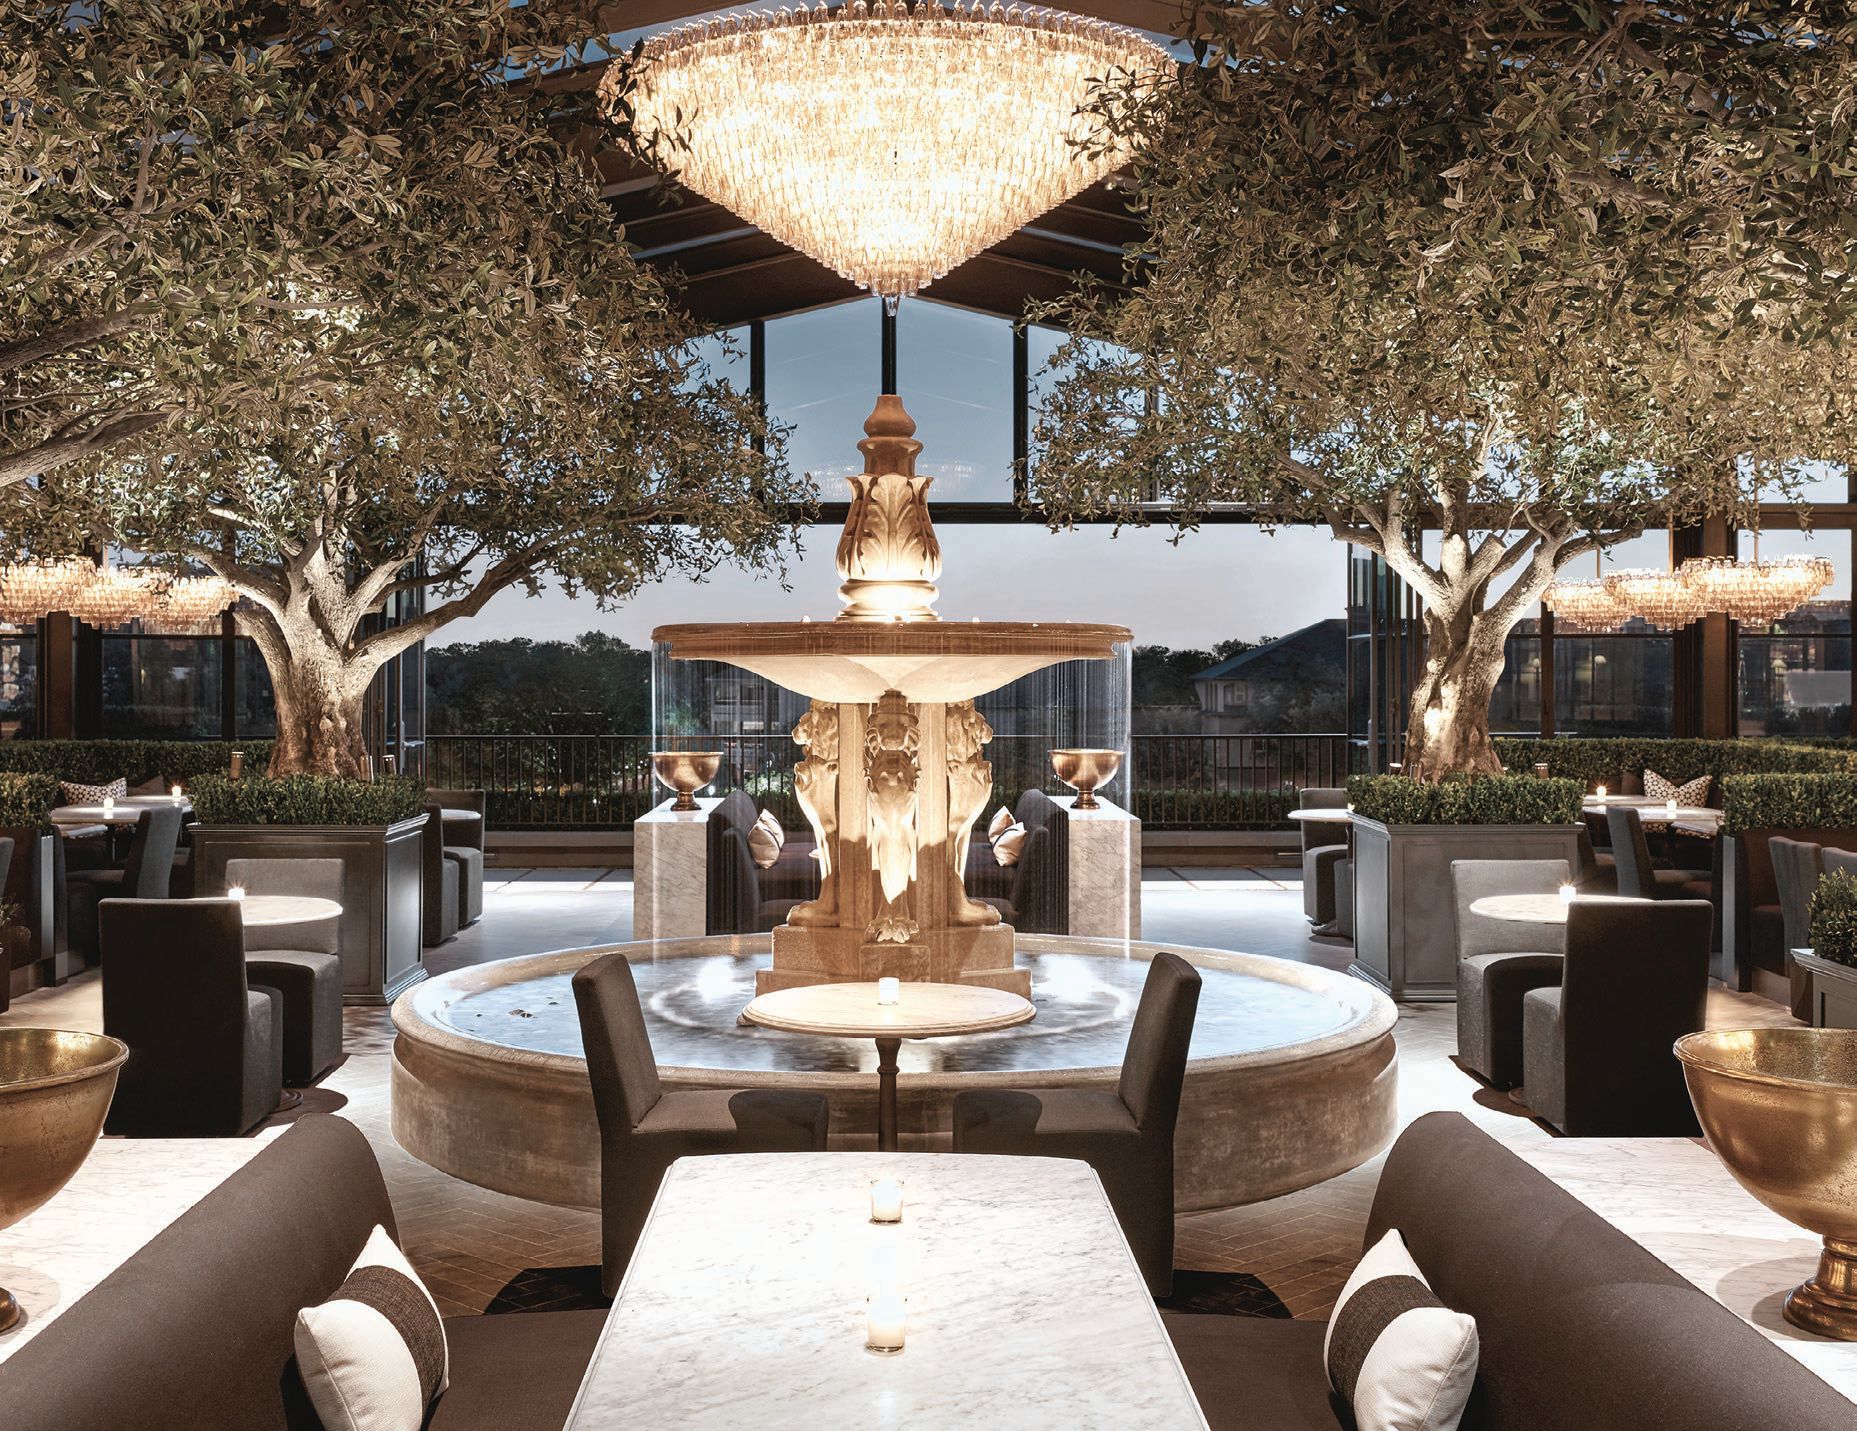 The glass-enclosed rooftop restaurant features retractable walls and is surrounded by exquisite furnishings available for purchase. PHOTO COURTESY OF RH OAK BROOK